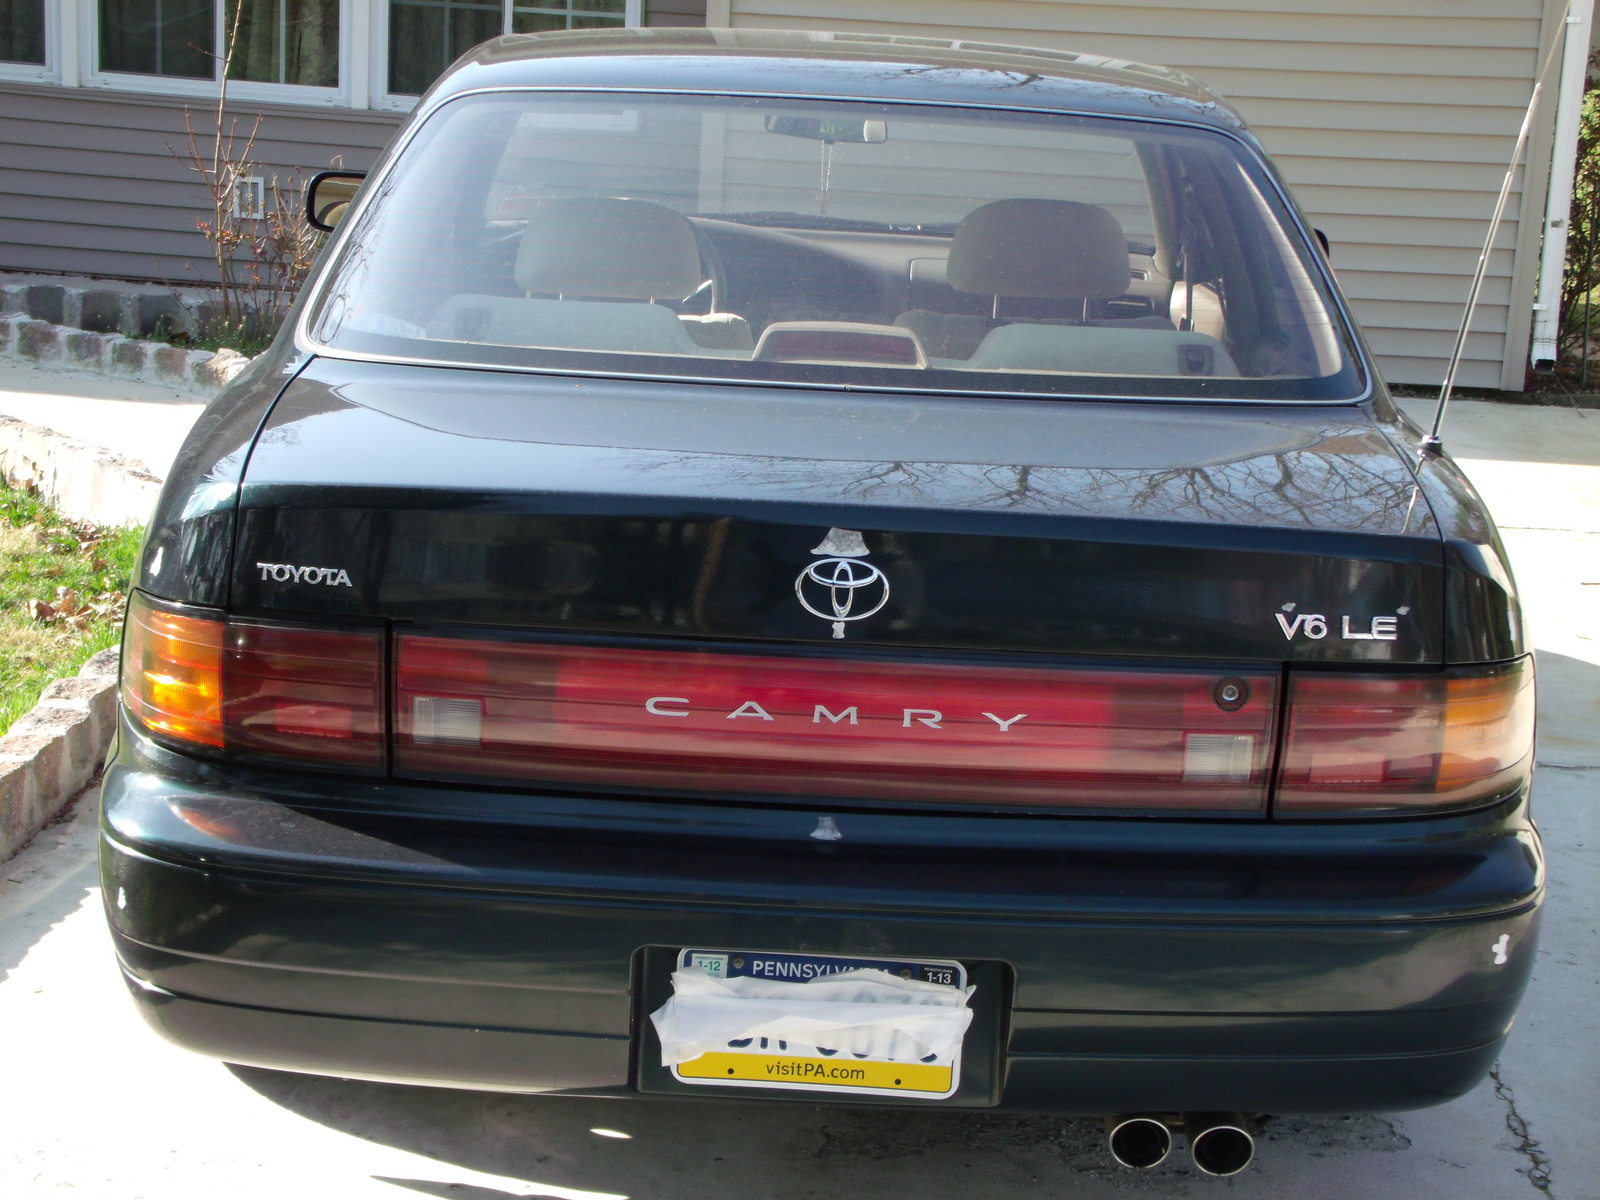 1992 toyota camry le v6 specs #4